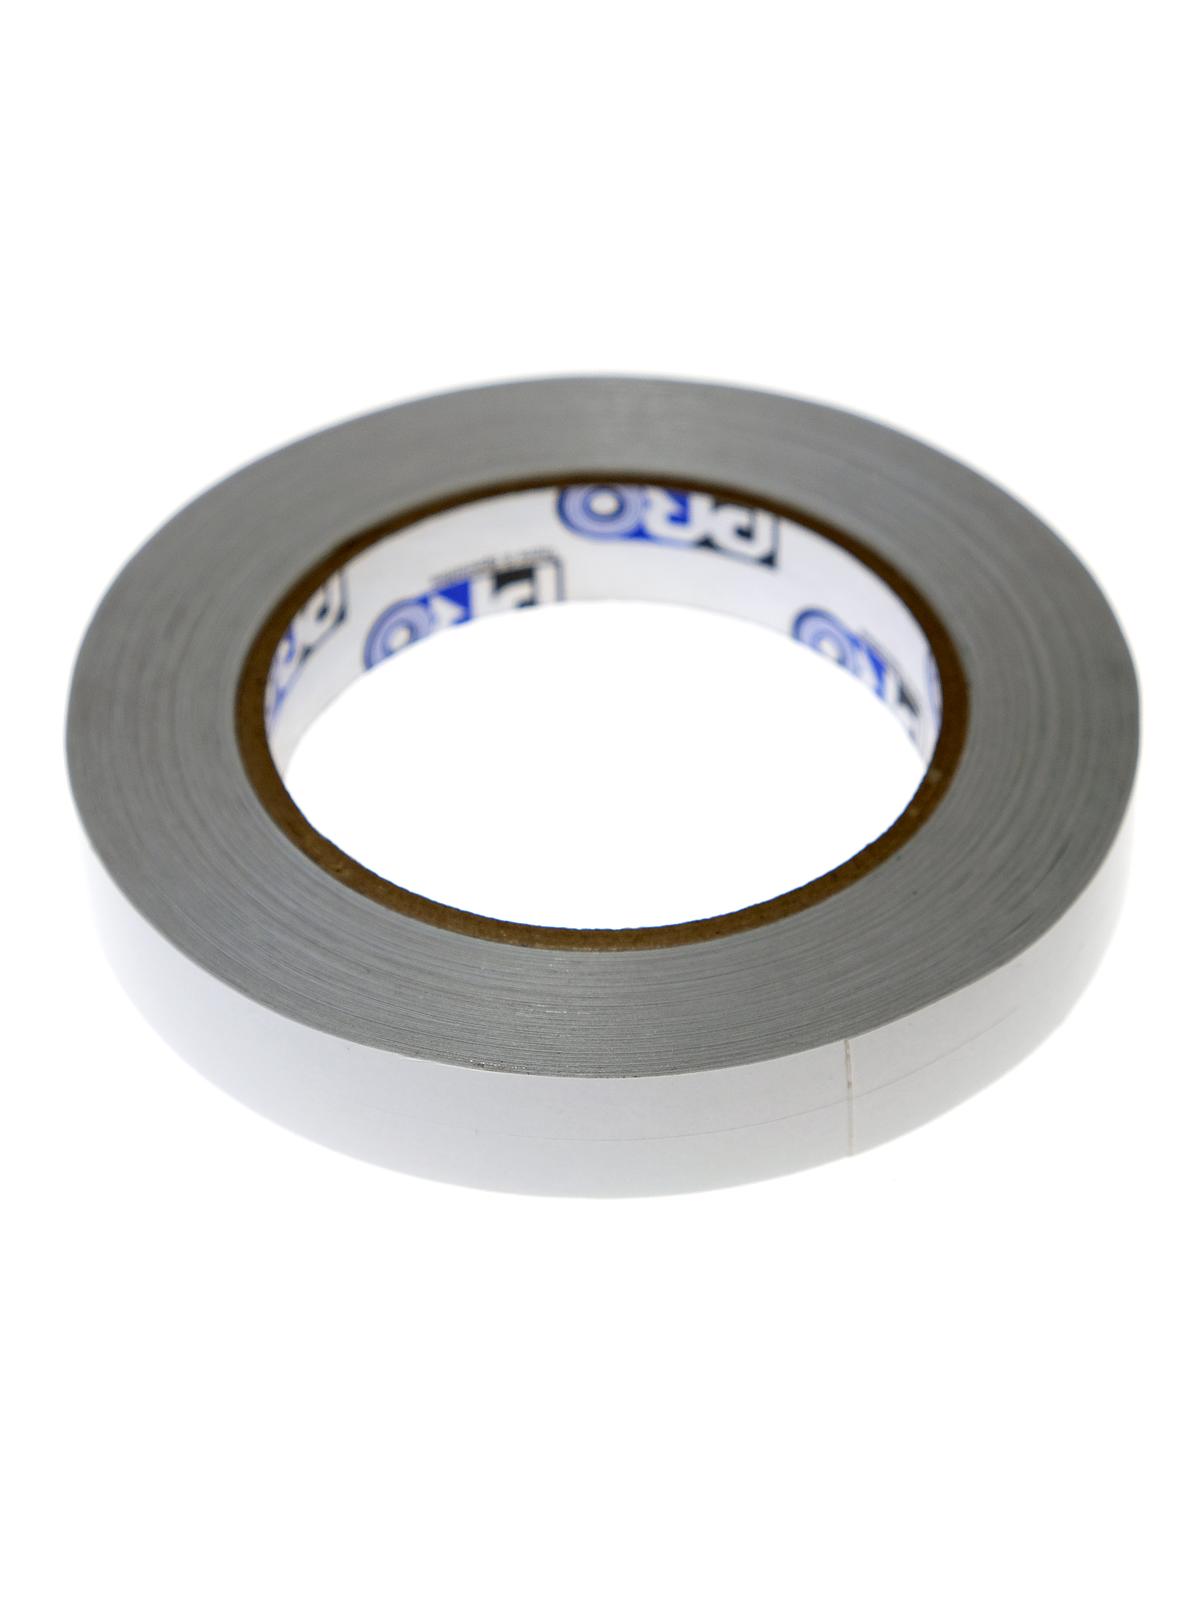 Double Stick Tape 3 4 In. X 36 Yd.